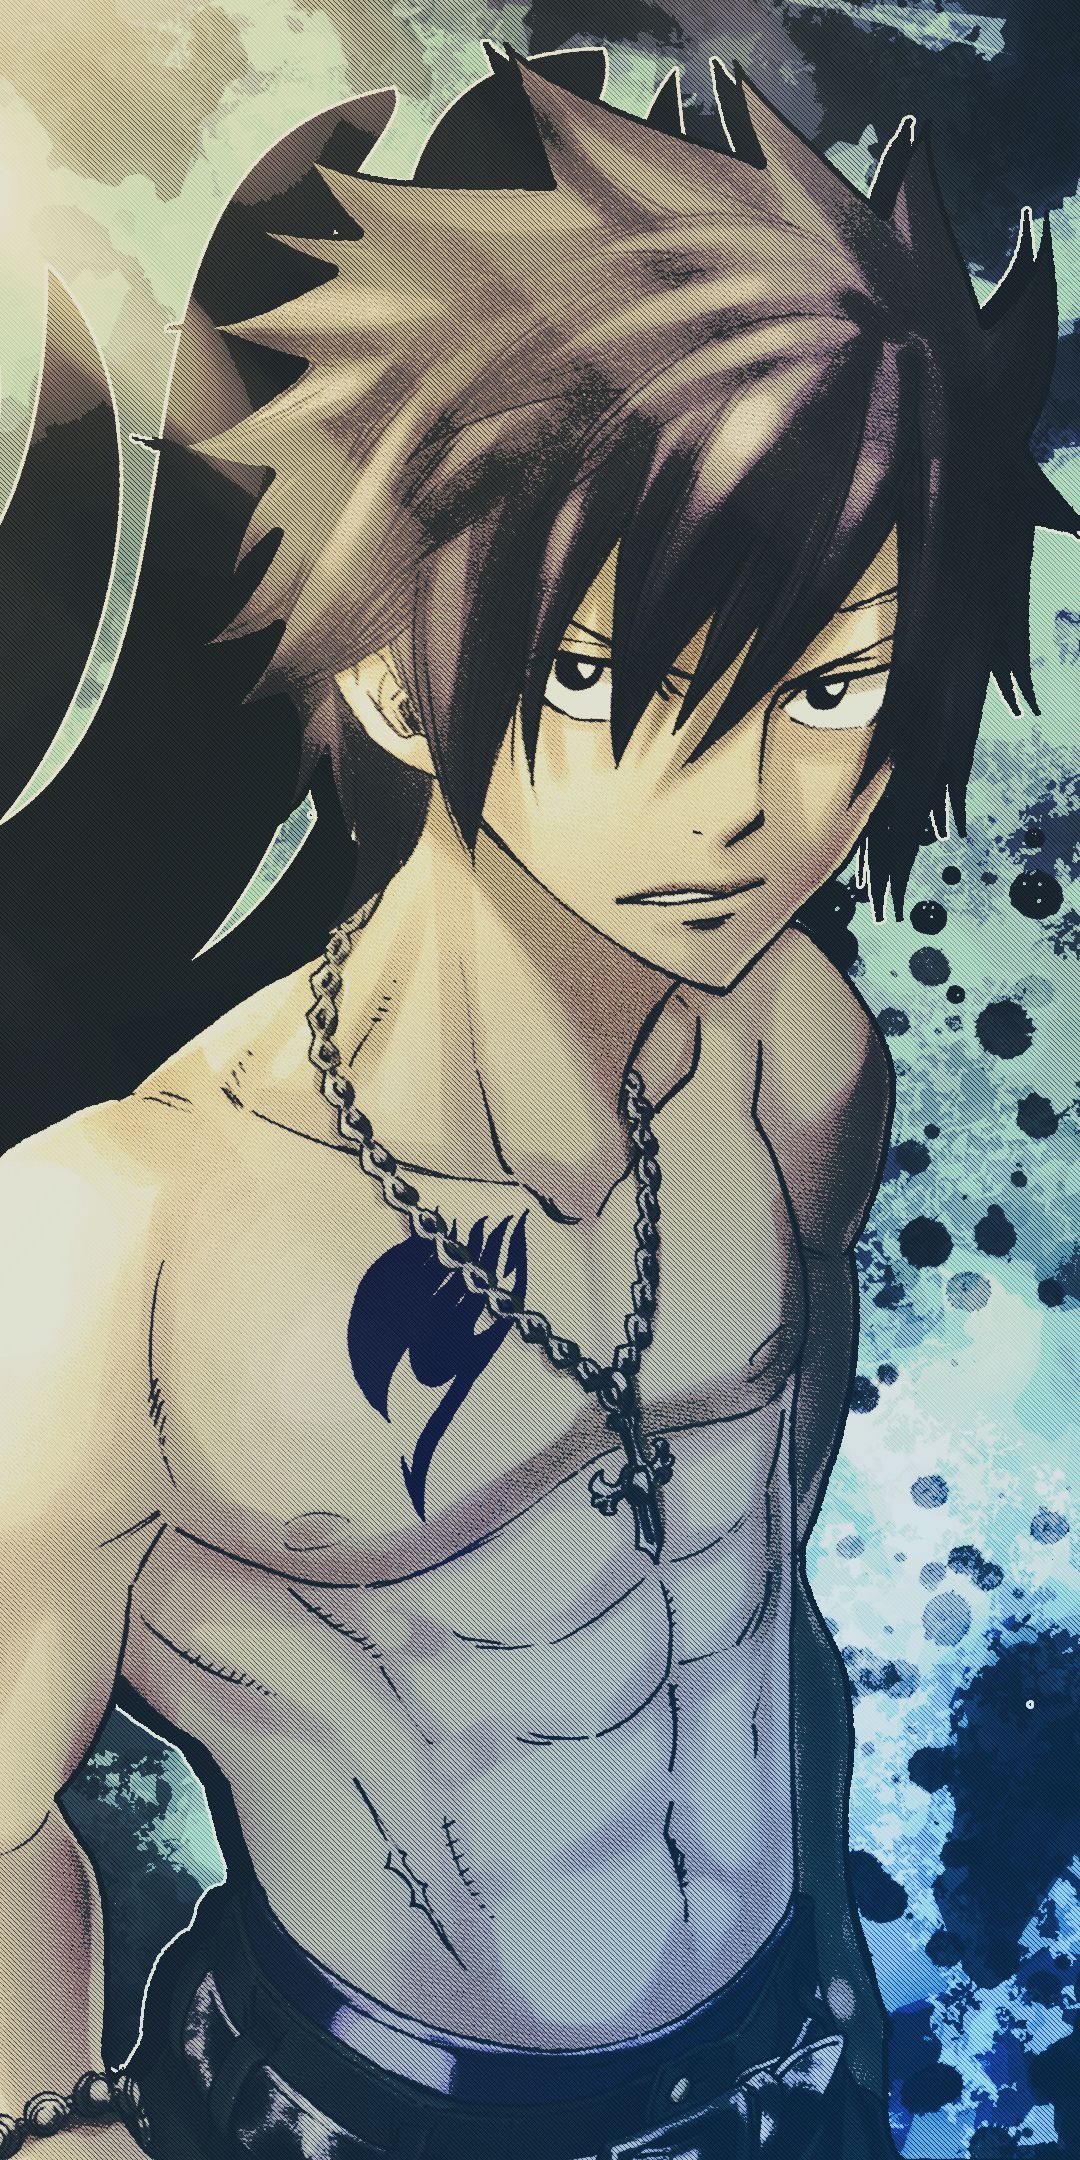 Gray Fullbuster: The shonen manga, Gray, Great ability in wielding the weapons produced by his Ice-Make spells. 1080x2160 HD Wallpaper.